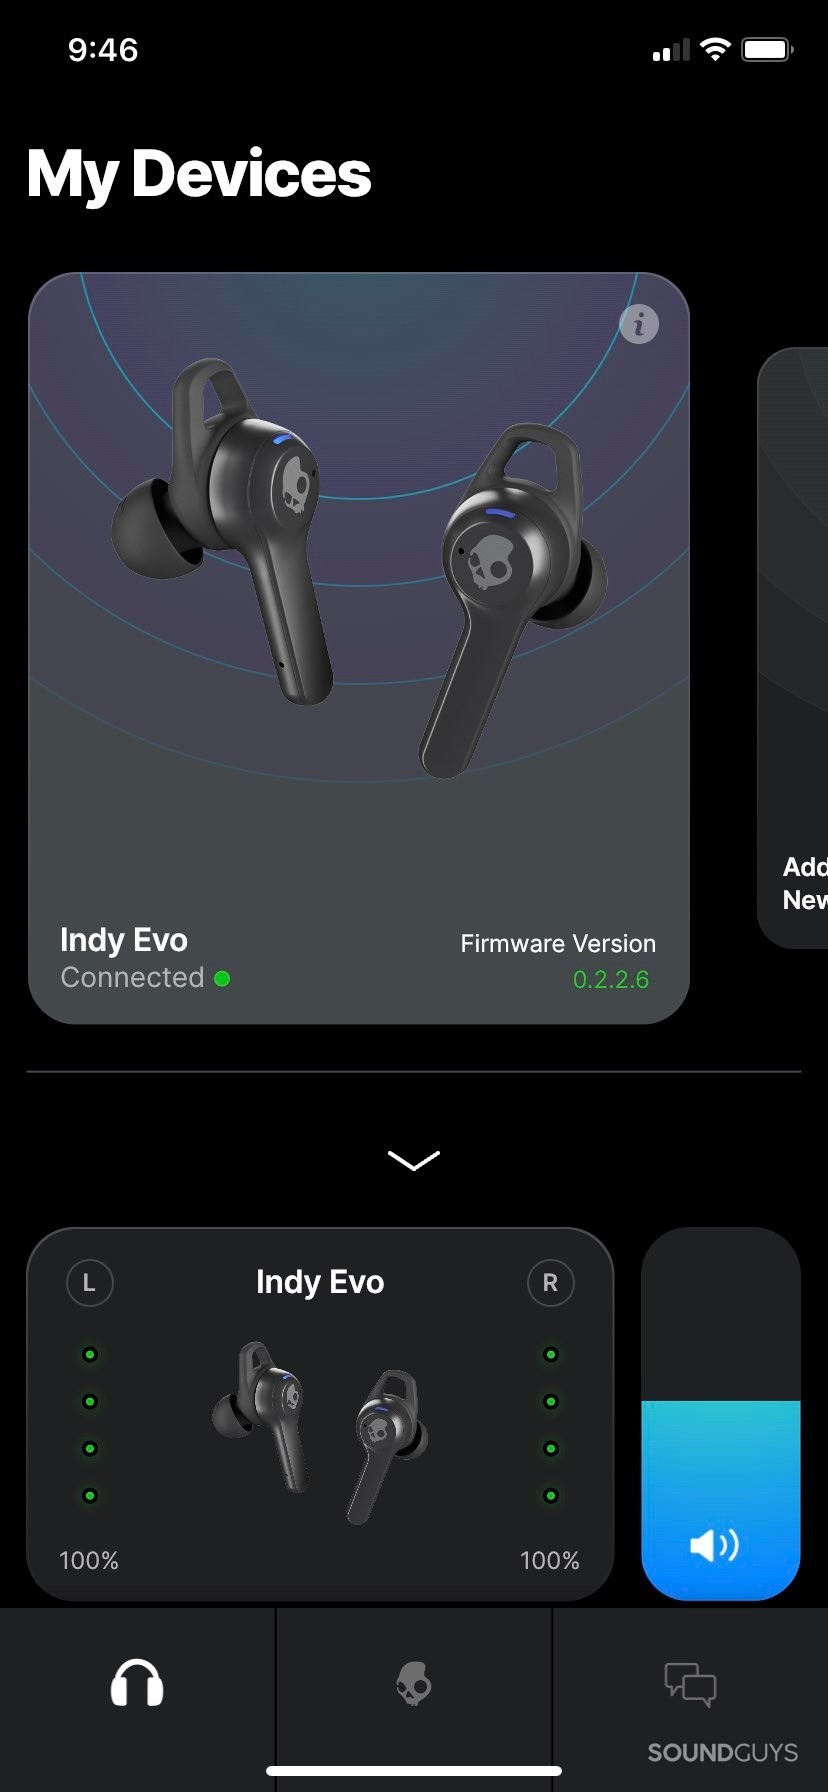 The Skullcandy app, showing the Skullcandy Indy Evo successfully connected.